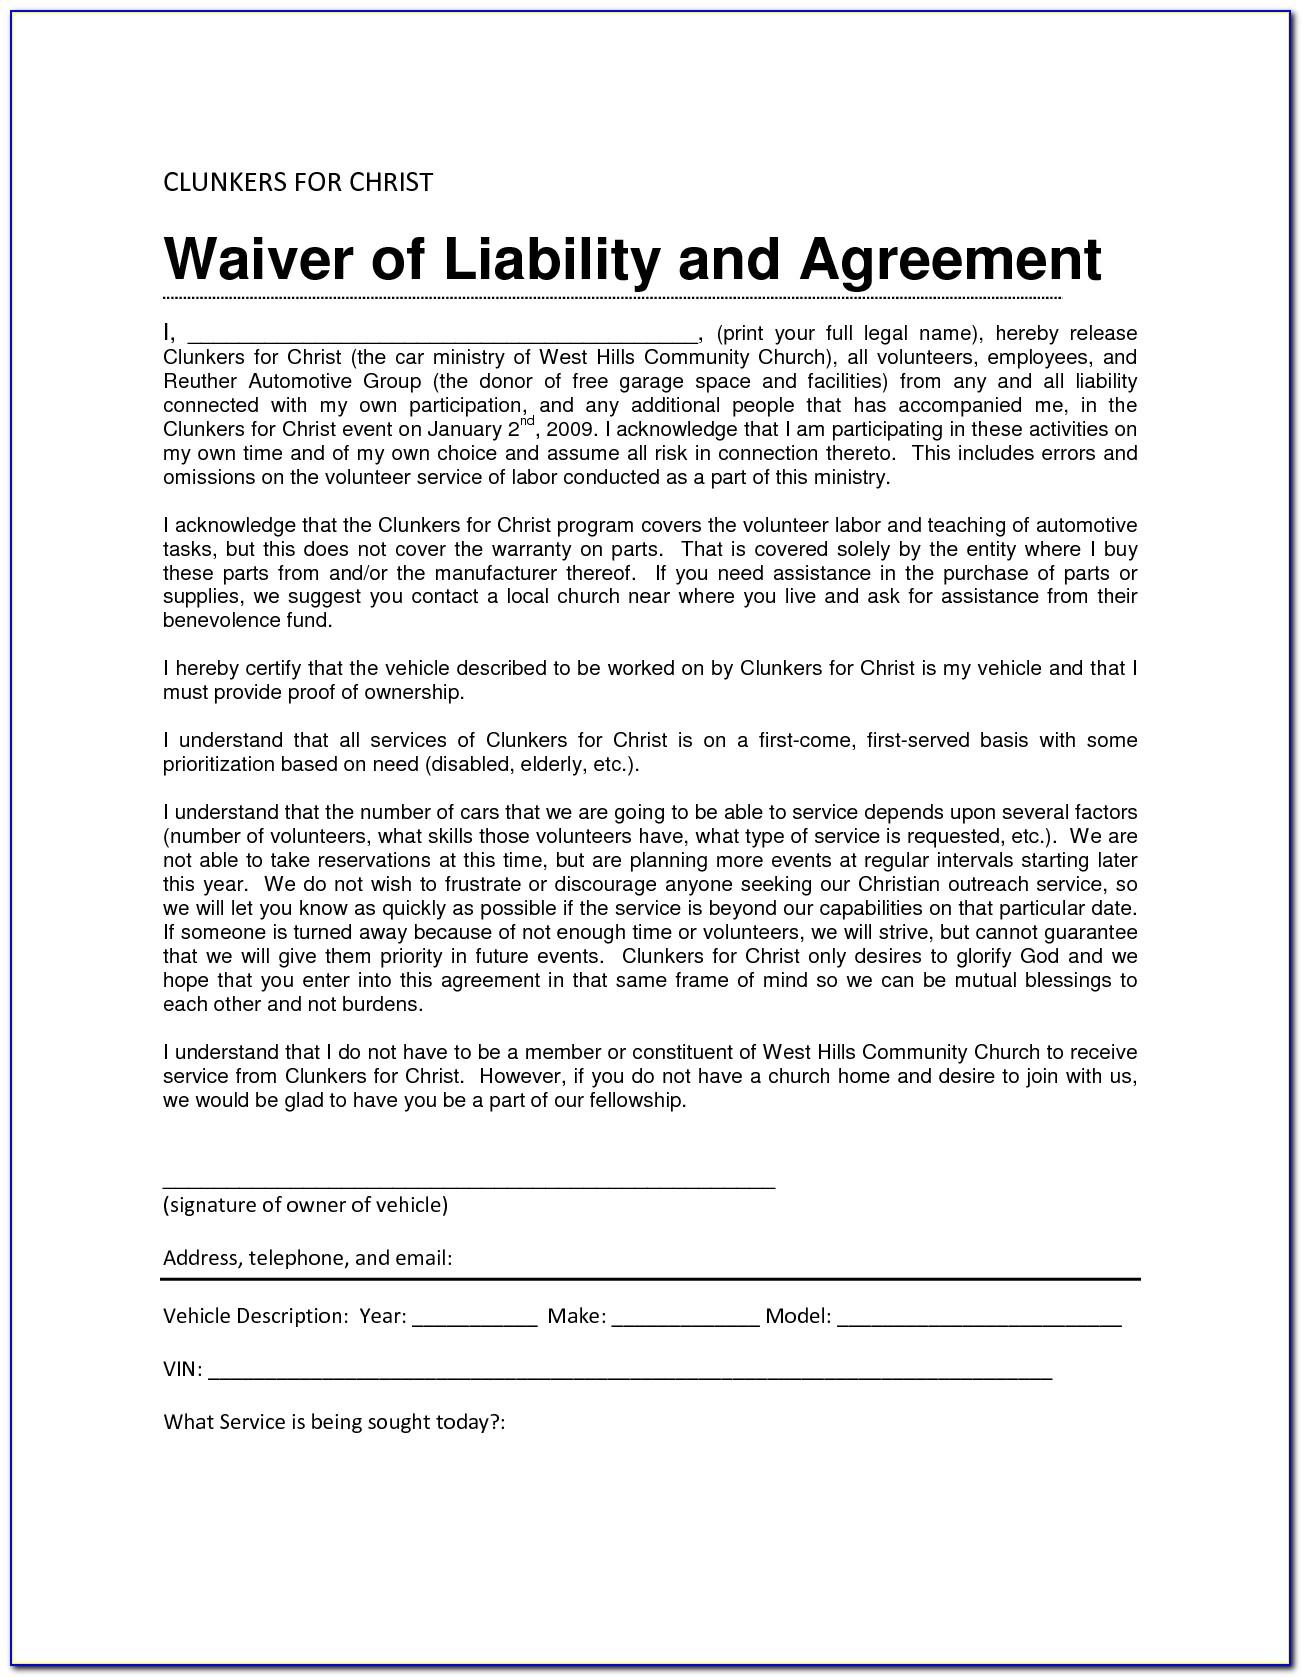 Liability Waiver Release Form Template